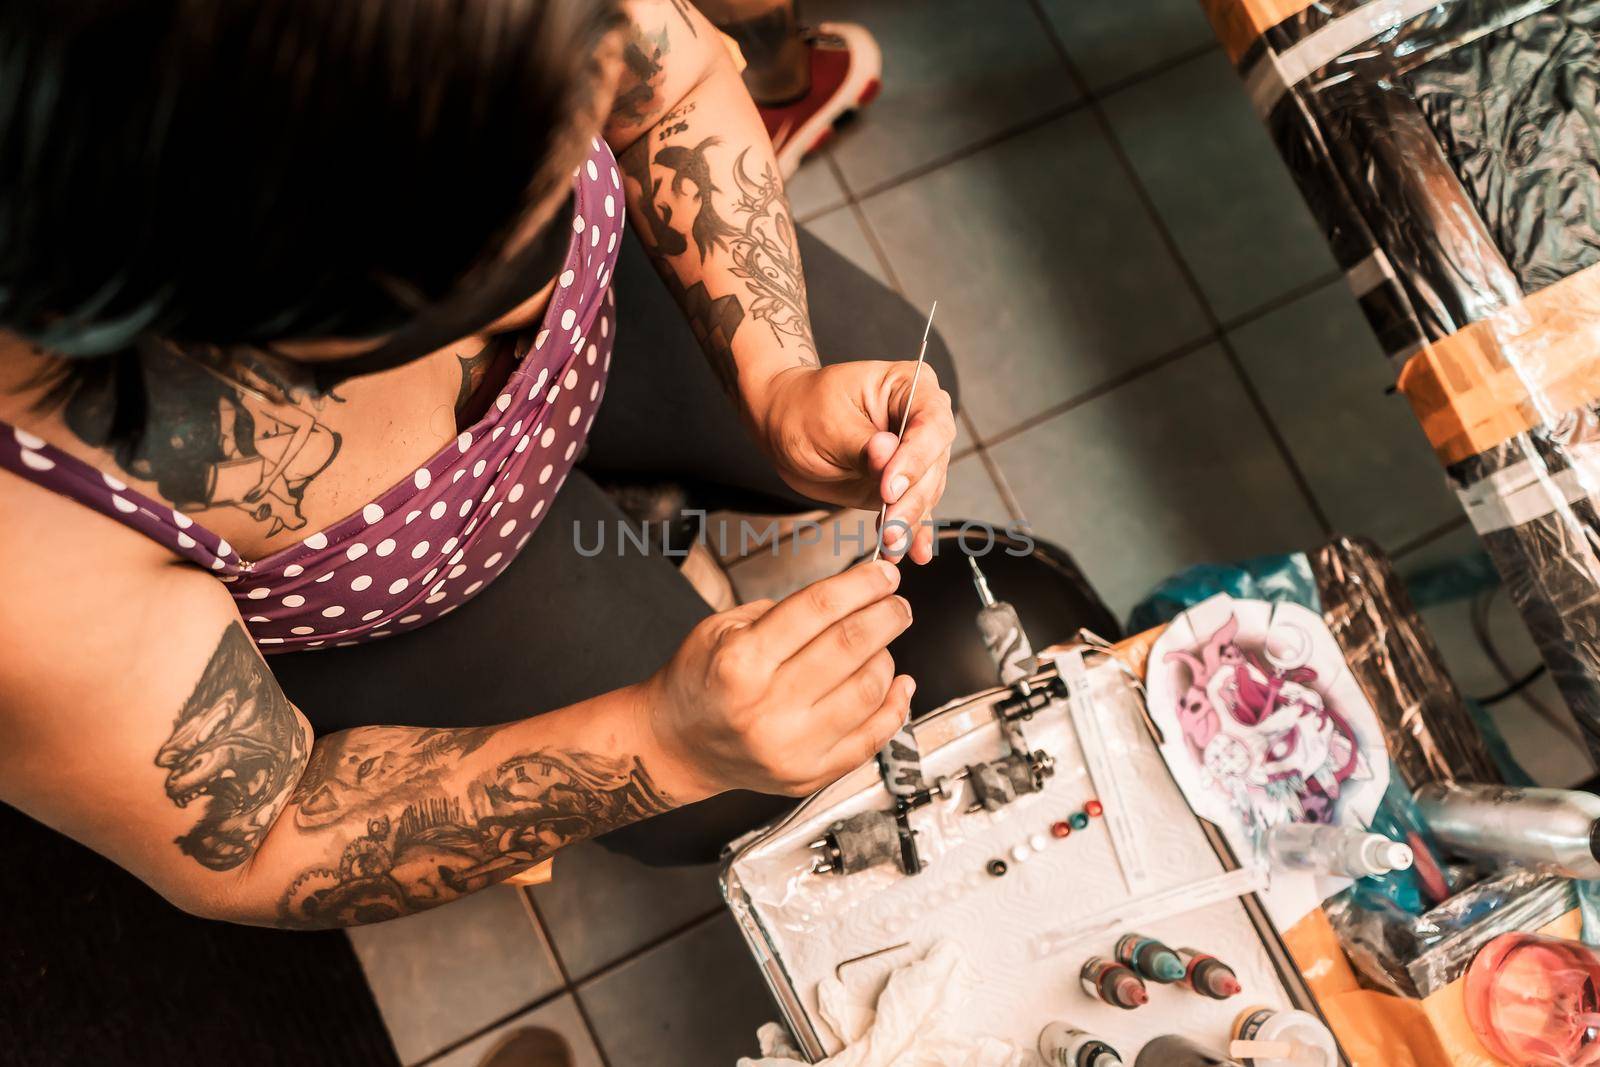 Latina tattoo artist preparing needles to work on a client's skin in a salon in Nicaragua by cfalvarez